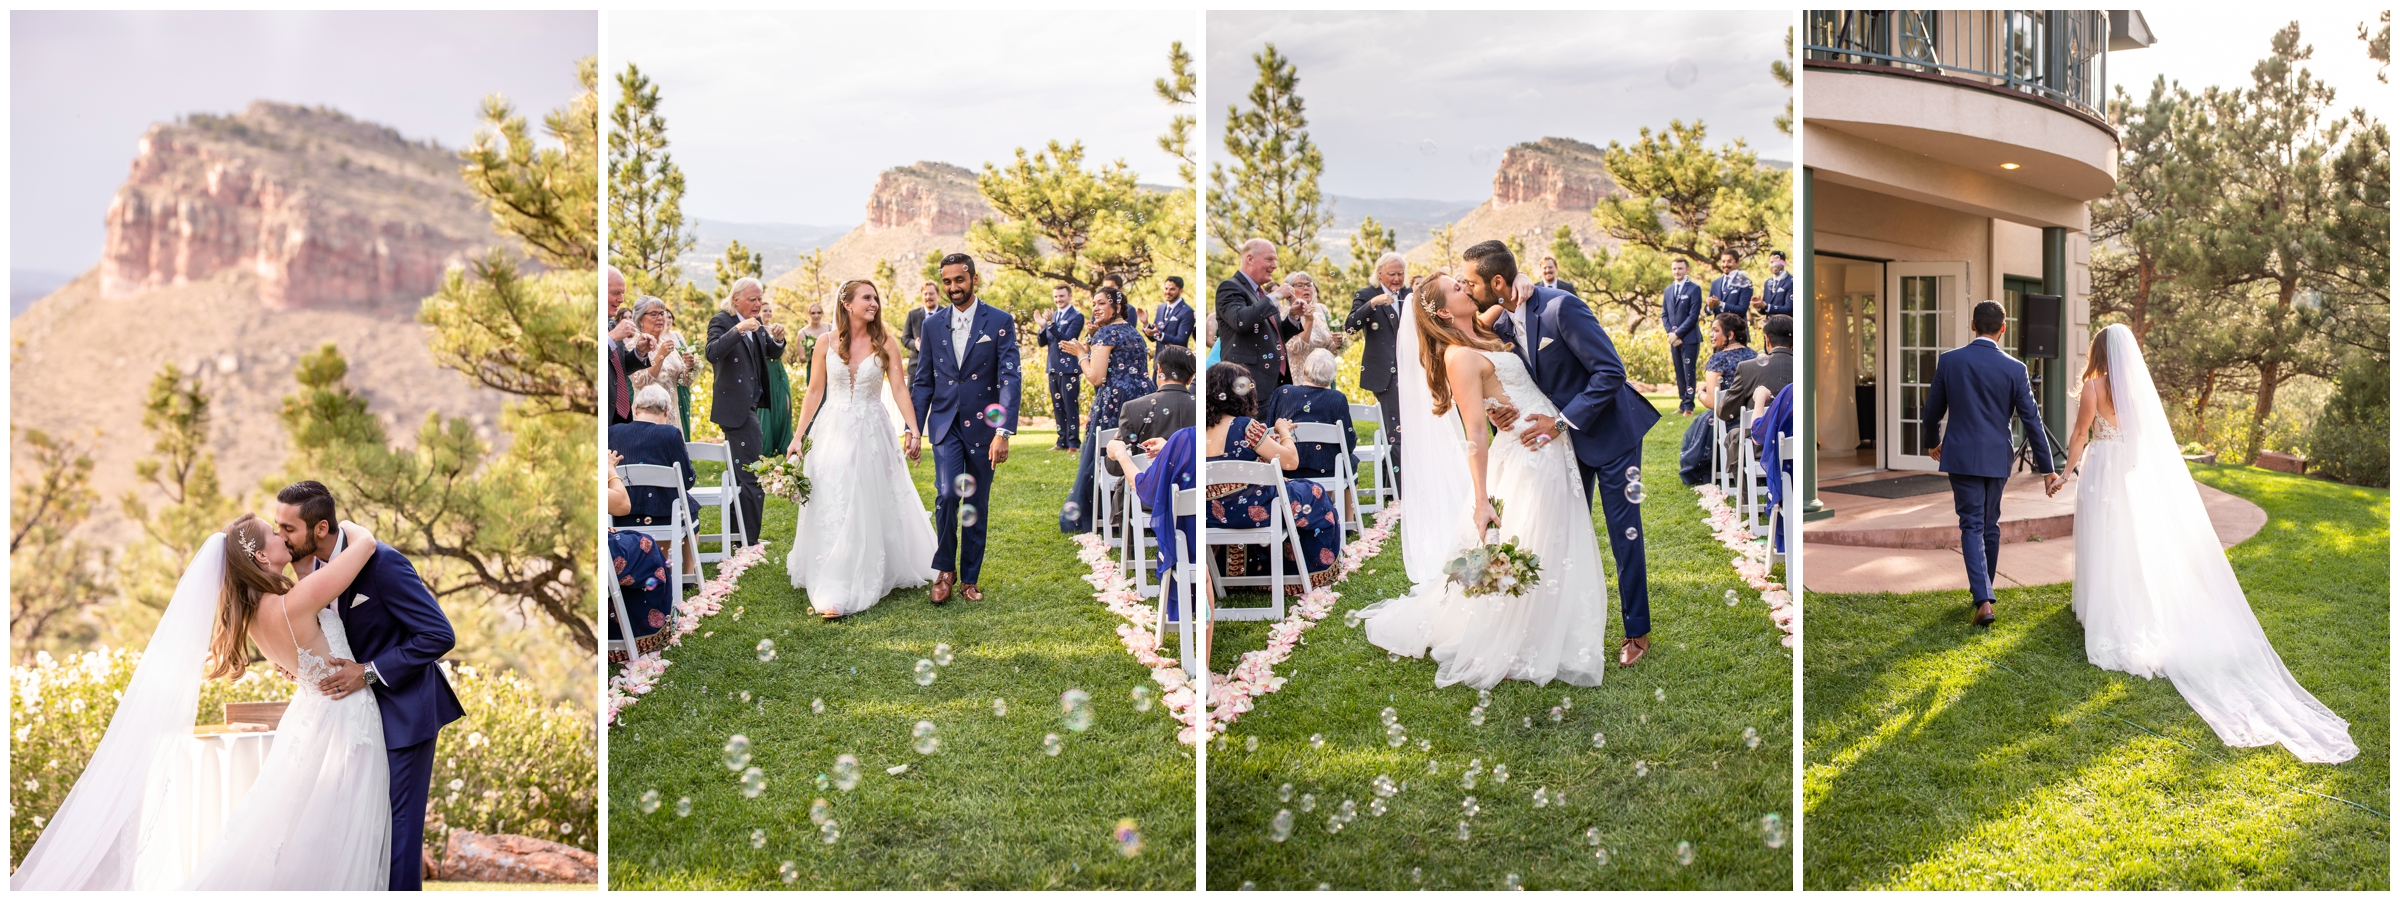 first kiss at Lionscrest Manor outdoor wedding ceremony in Lyons Colorado 